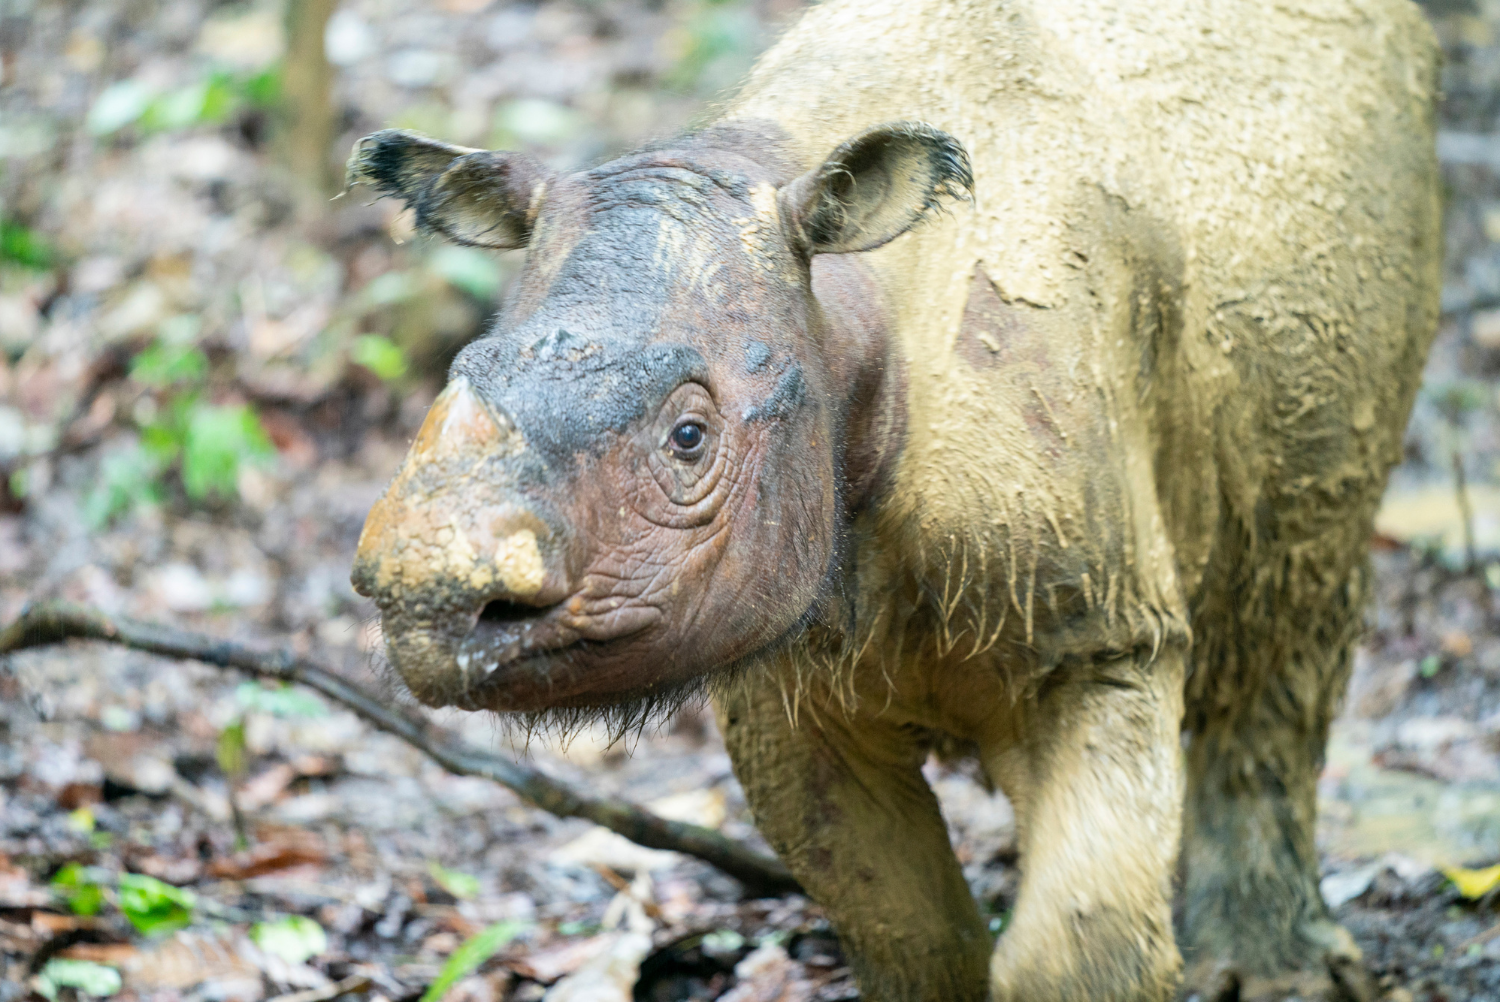 The last Sumatran rhinoceros individual of Malaysia Iman, photographed at her sanctuary in Malaysia. Iman died 23.11.2019 of cancer. Iman was photographed only weeks before her death by a Finnish photographer Kaisa Siren.